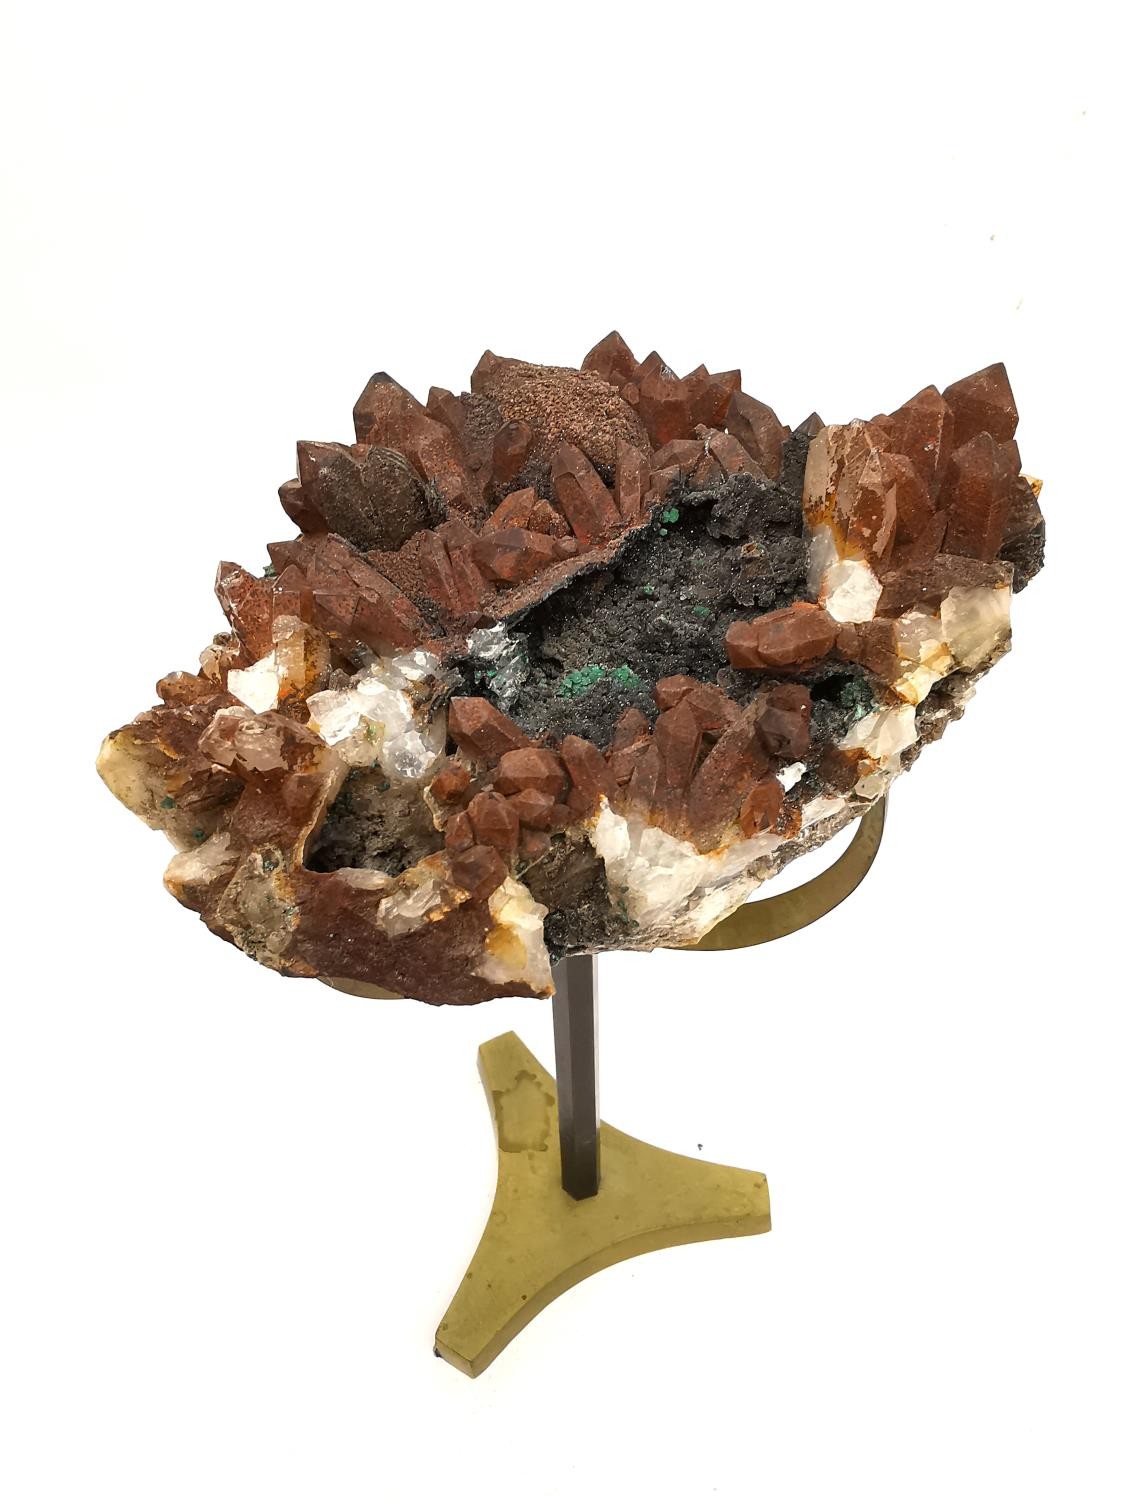 A Limonite stained quartz and malachite crystal specimen from Durango, Mexico. Mounted on brass - Bild 3 aus 8